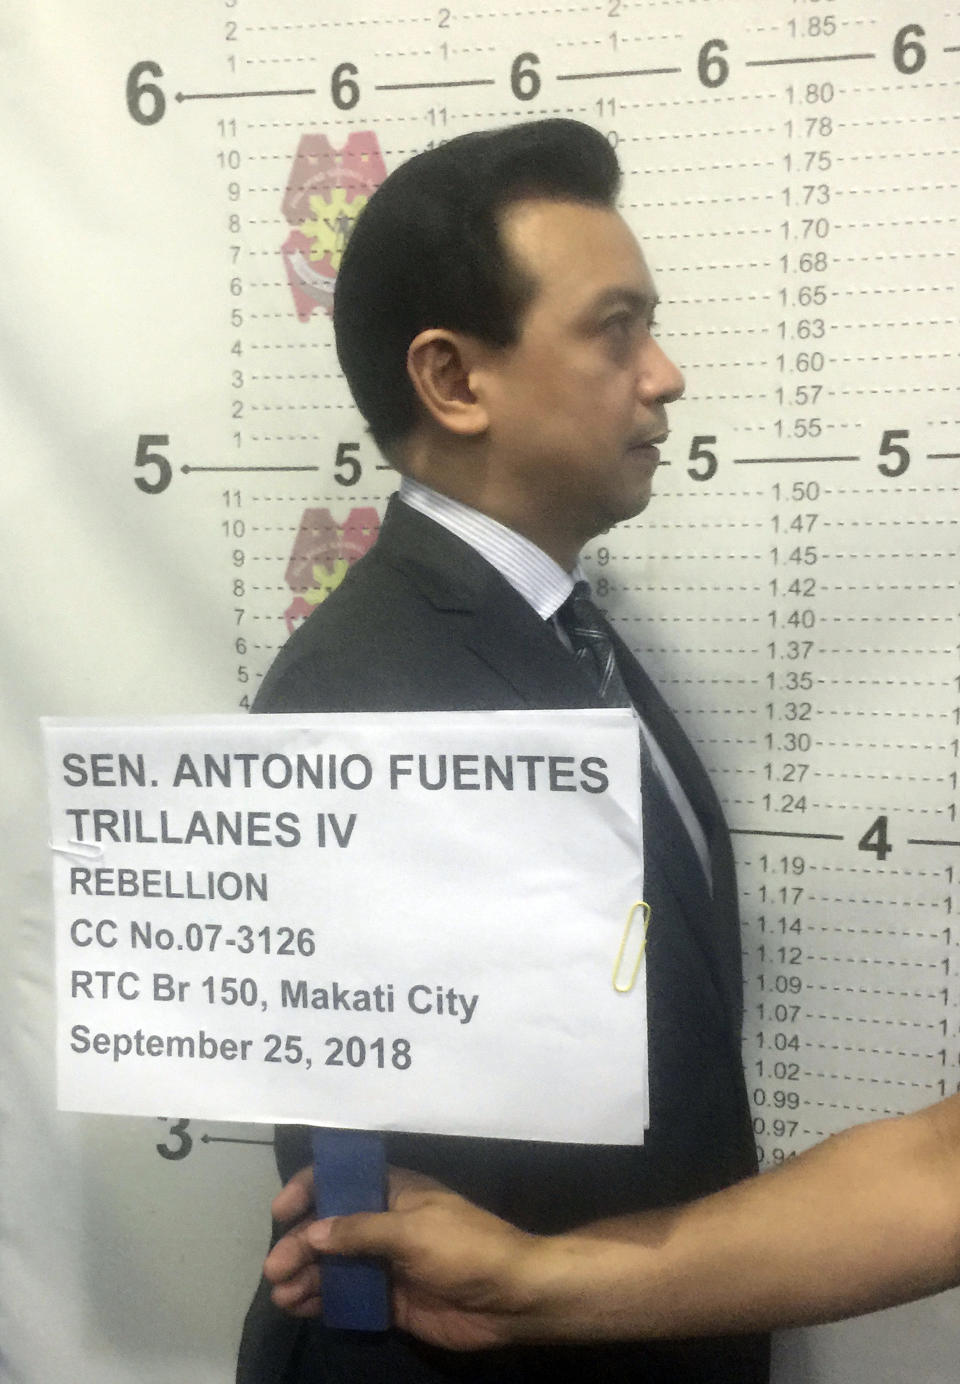 In this photo provided by the Philippine National Police Makati, Philippine opposition Sen. Antonio Trillanes IV for his mugshot inside a police station in Makati, metropolitan Manila after the Makati Regional Trial Court Branch 150 issued an order for his arrest Tuesday, Sept. 25, 2018. A Philippine court ordered Trillanes arrested Tuesday after the president revoked the senator's 2011 amnesty for a failed coup attempt and revived rebellion charges against him in an unprecedented legal move the legislator called a blow to democracy. Trillanes later posted bail. (Philippine National Police Makati via AP)